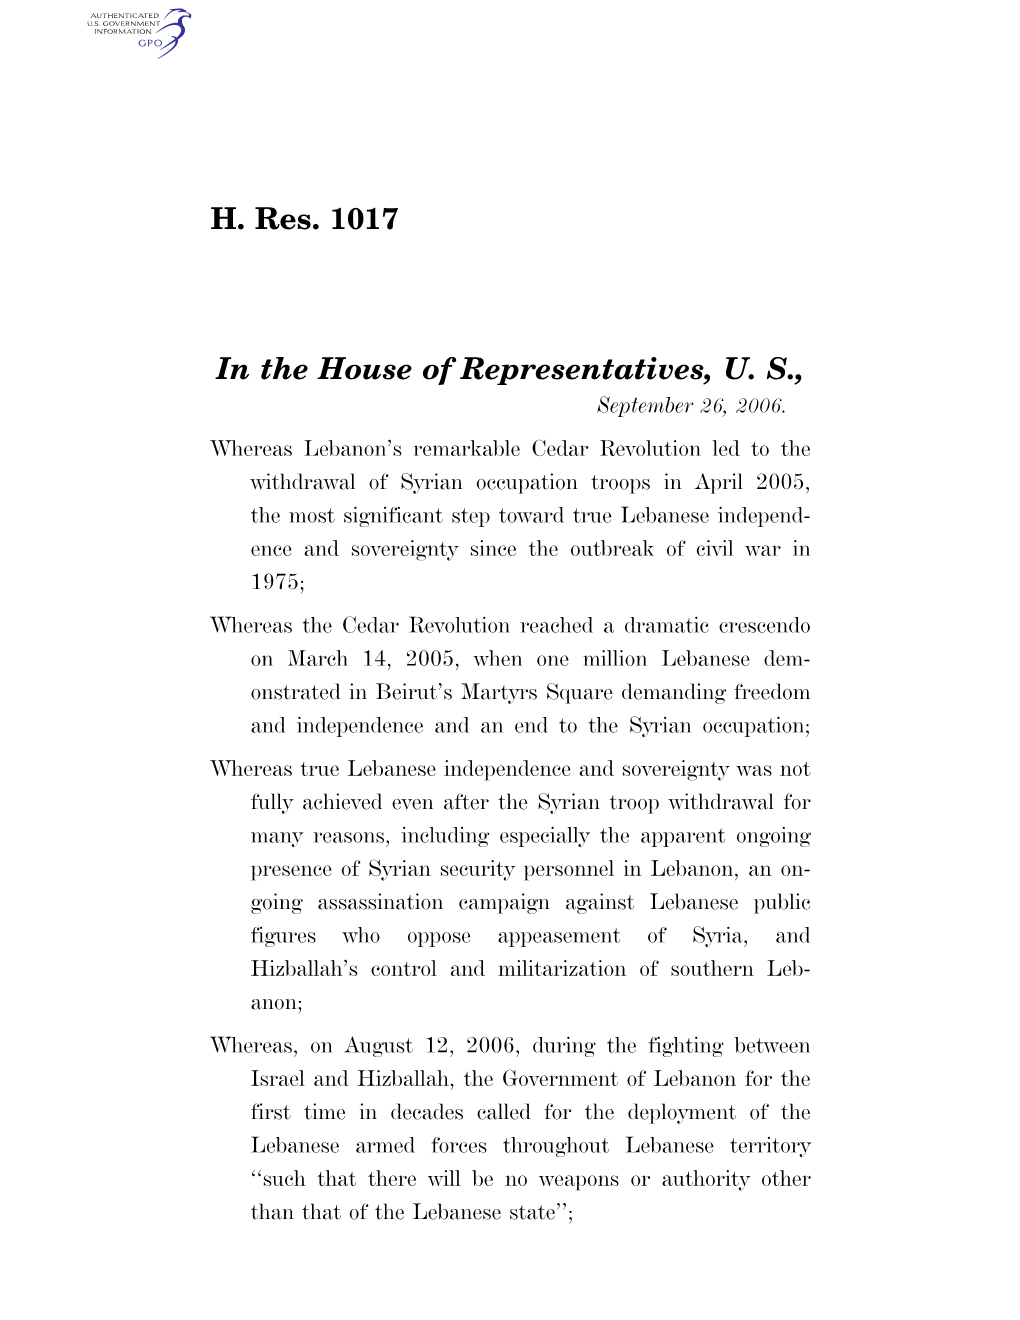 H. Res. 1017 in the House of Representatives